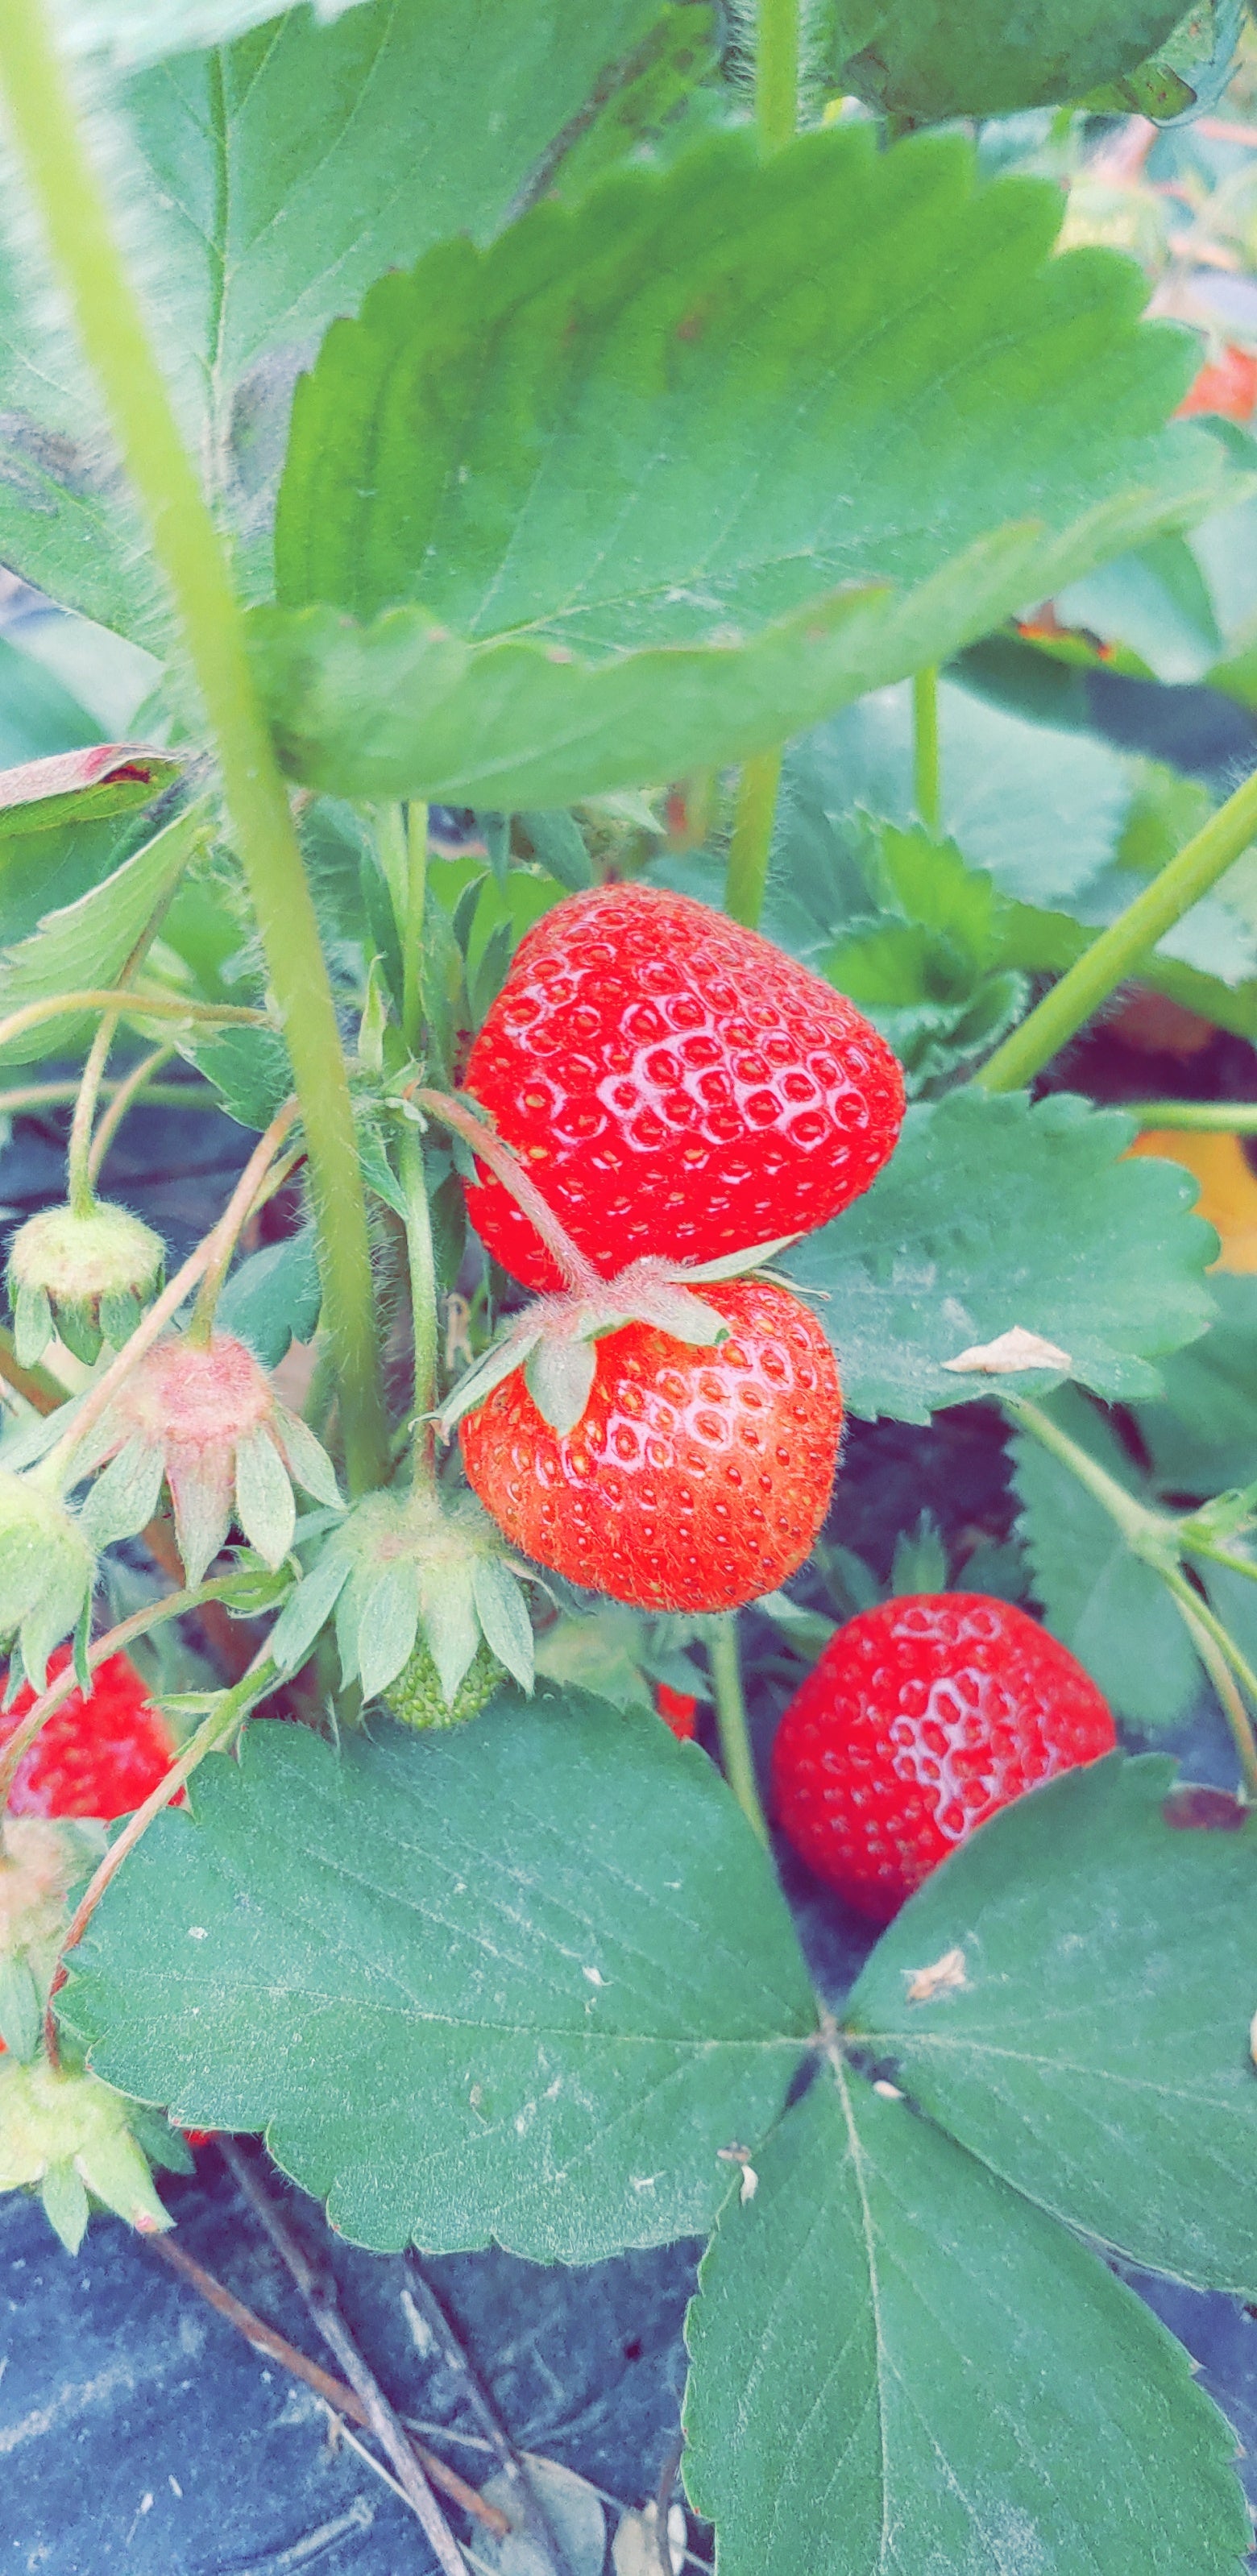 UPICK Strawberries Pre-pay FOR 5/20 only!!